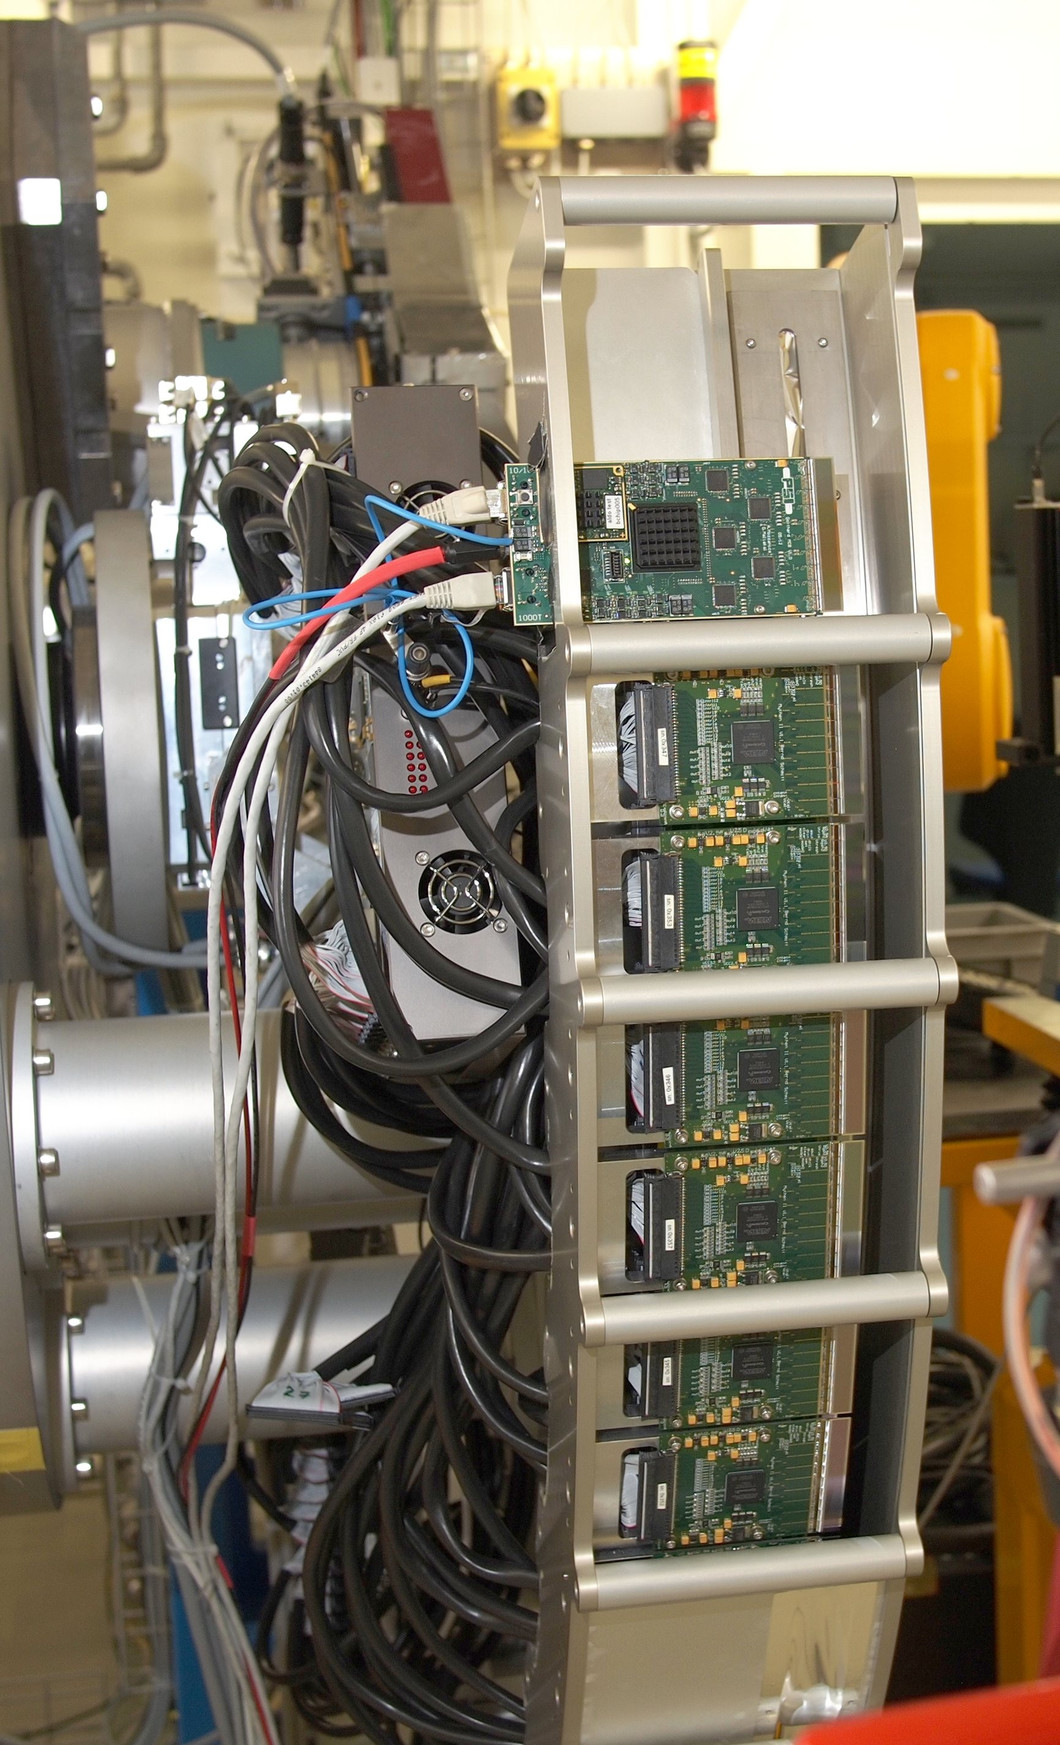 A Gotthard module undet test in the Mythen detector array at the SLS Material Science beamline.